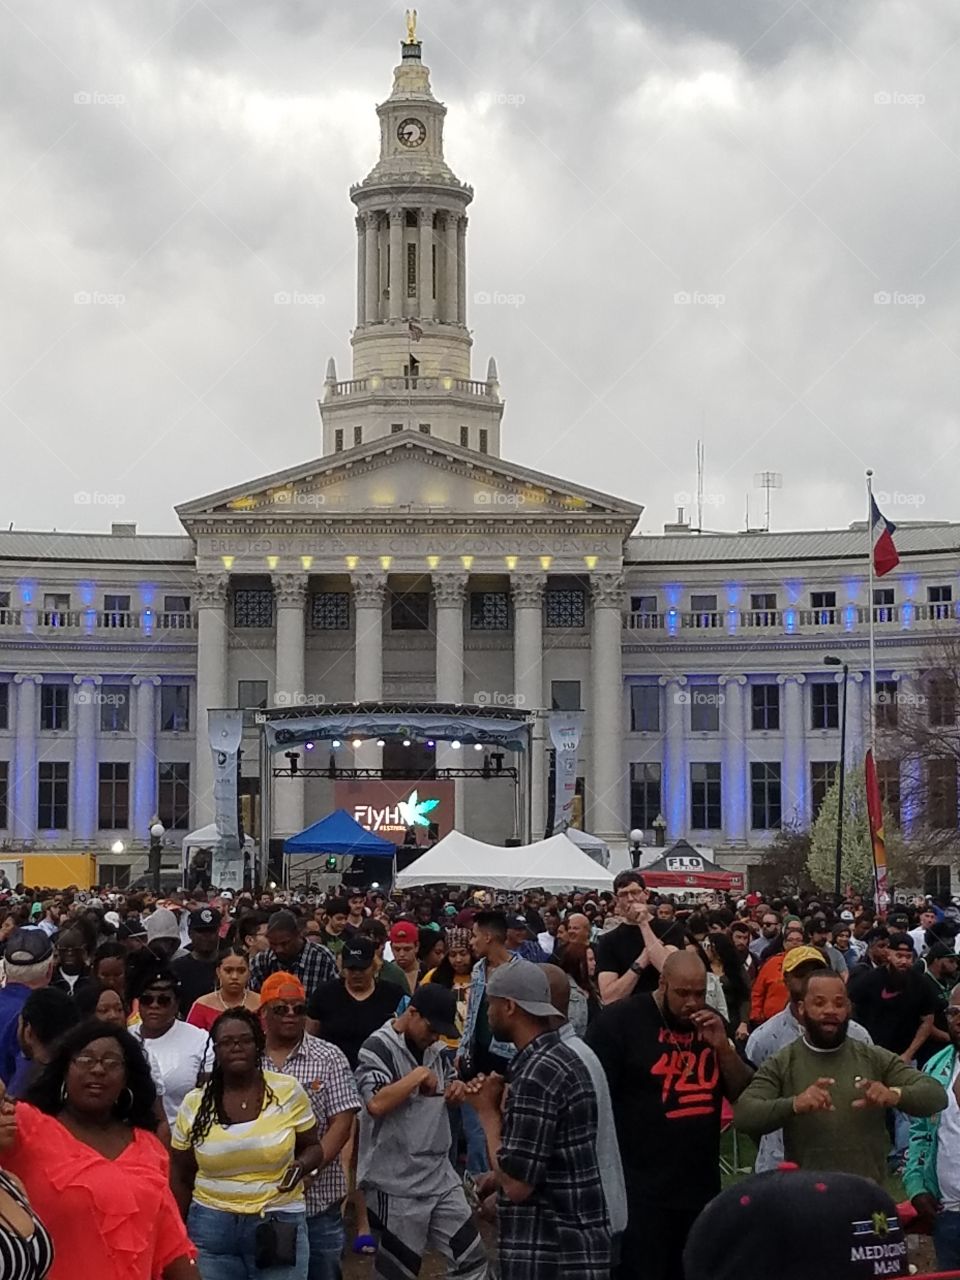 The 420 rally in April 20th in Denver, CO.  Set in front of the Denver city Capitol building and courthouse.